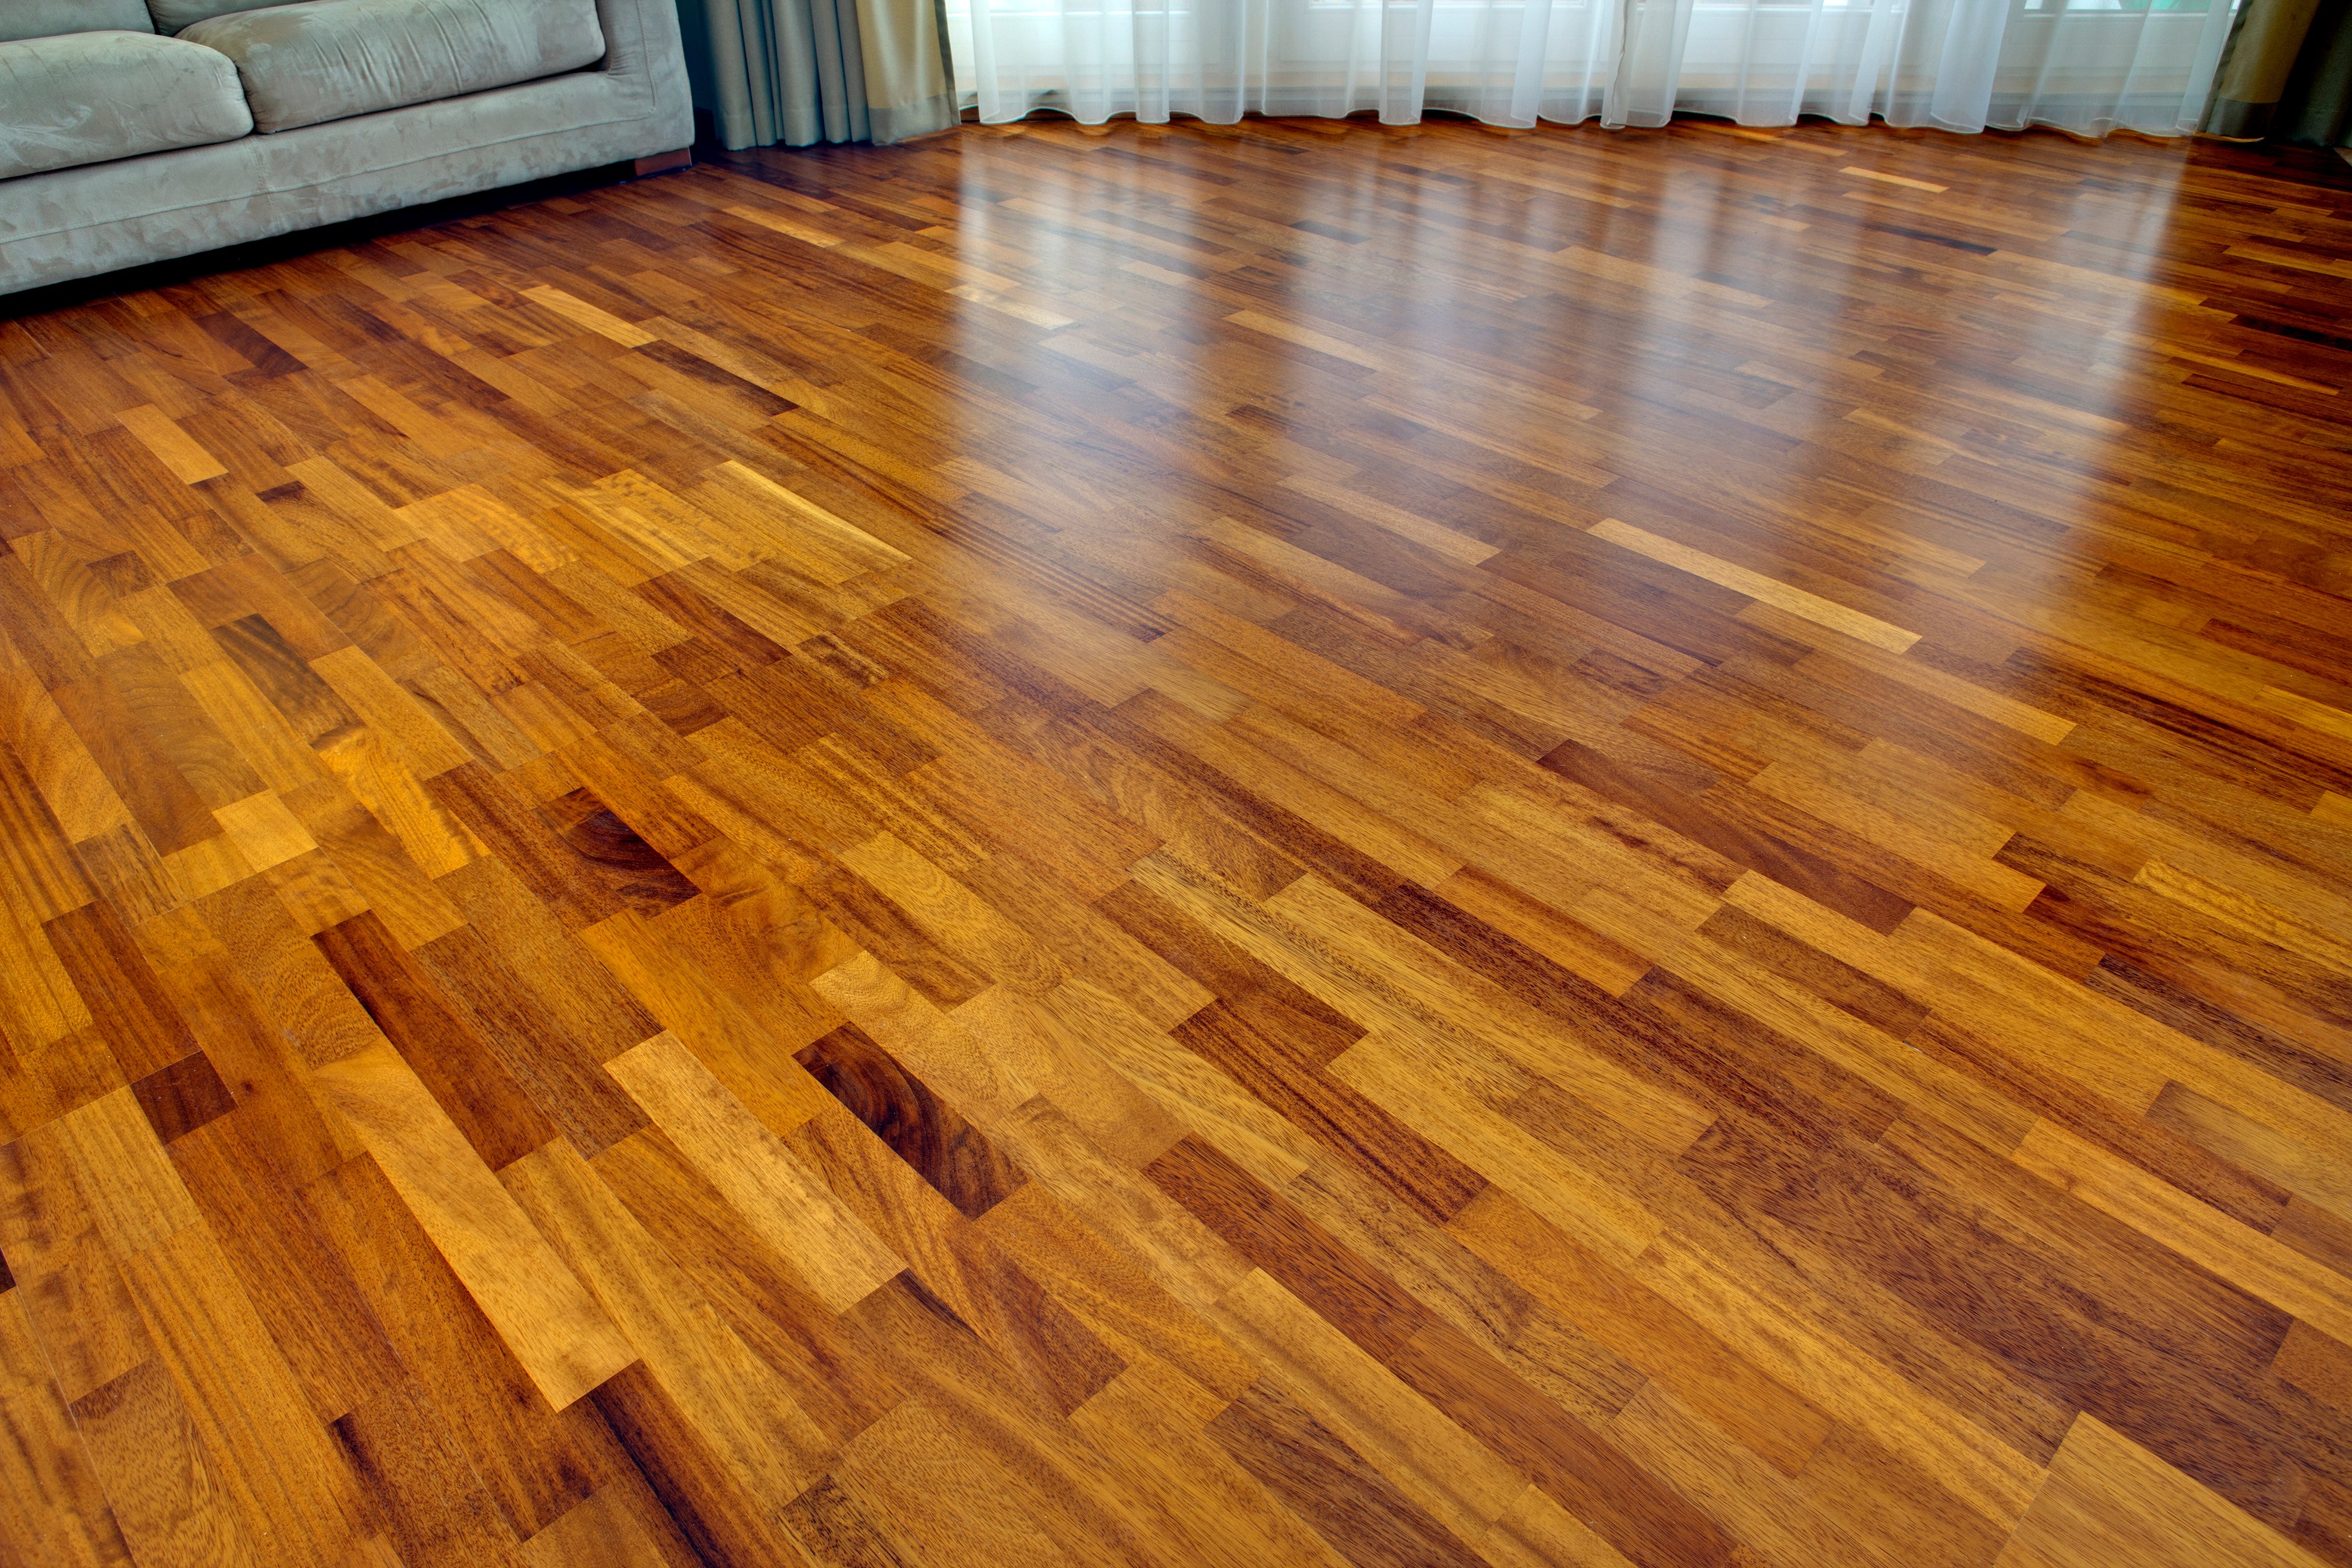 How To Install Hardwood Floors With, How To Install Heated Hardwood Floors